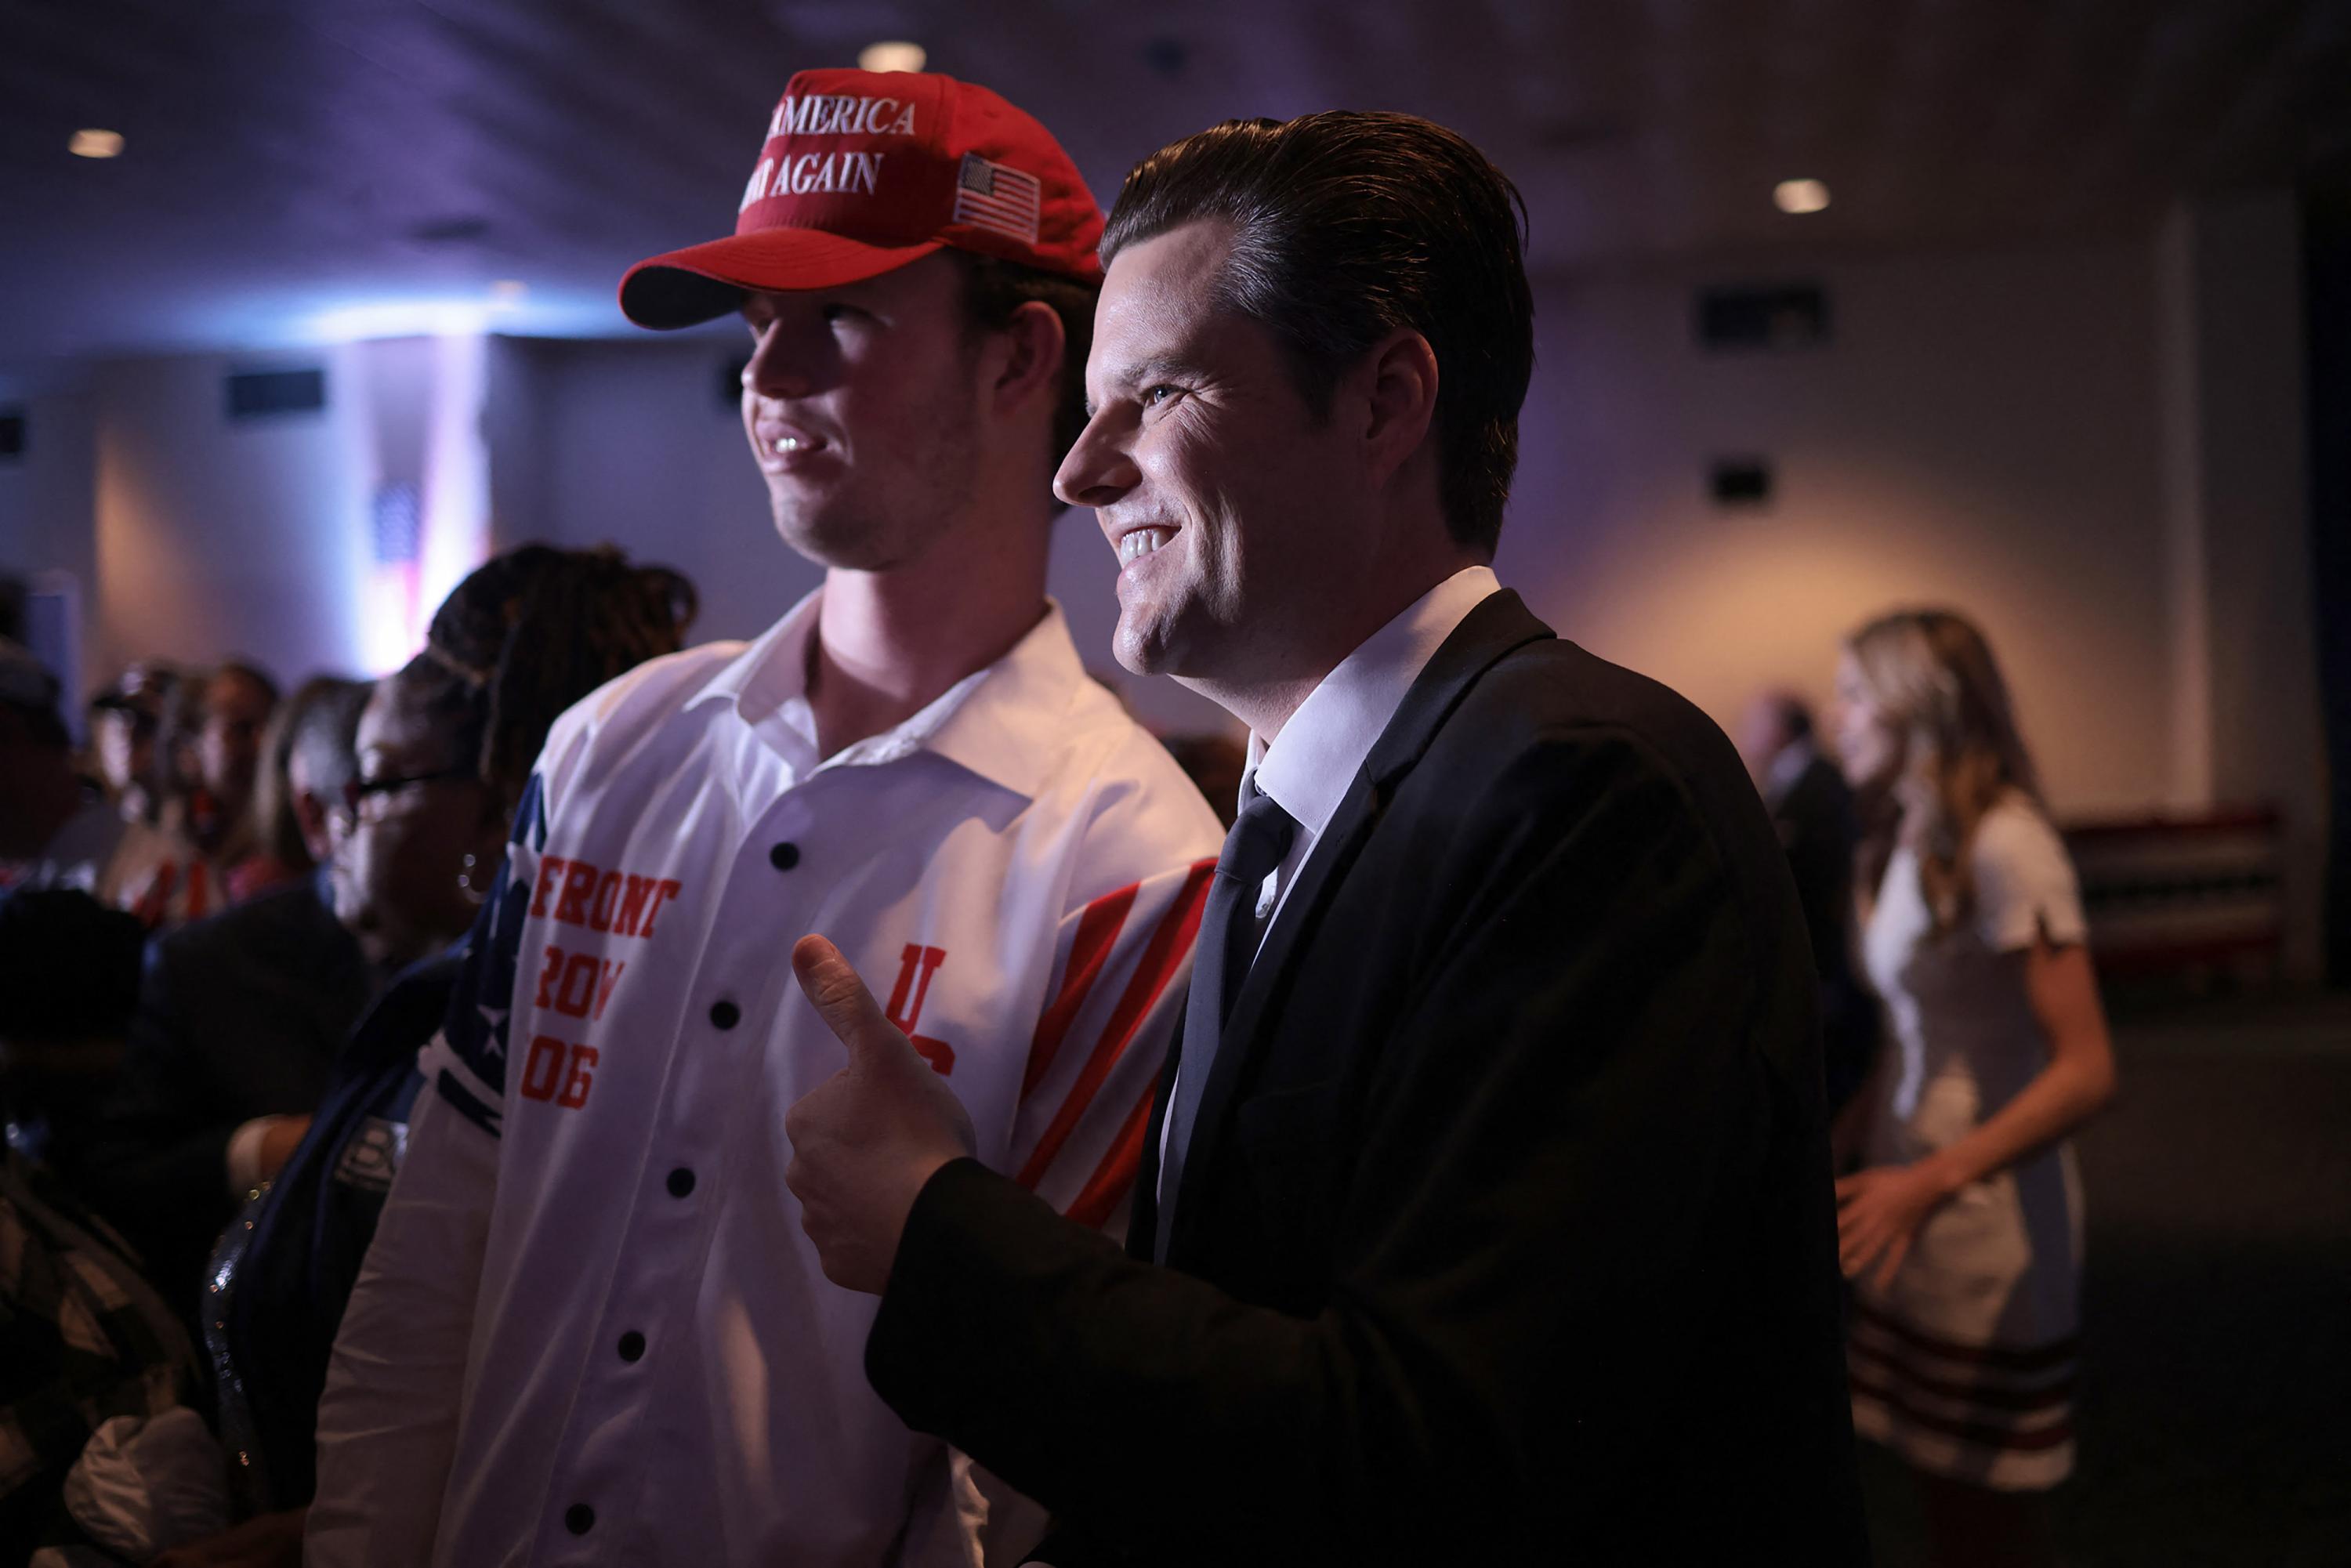 Rep. Matt Gaetz (R-FL) greets supporters after Republican presidential candidate and former President Donald Trump spoke during an election night watch party at the State Fairgrounds on February 24, 2024 in Columbia, South Carolina, the day that Trump defeated opponent Nikki Haley in the South Carolina Republican primary. Photo Win McNamee/Getty Images/AFP